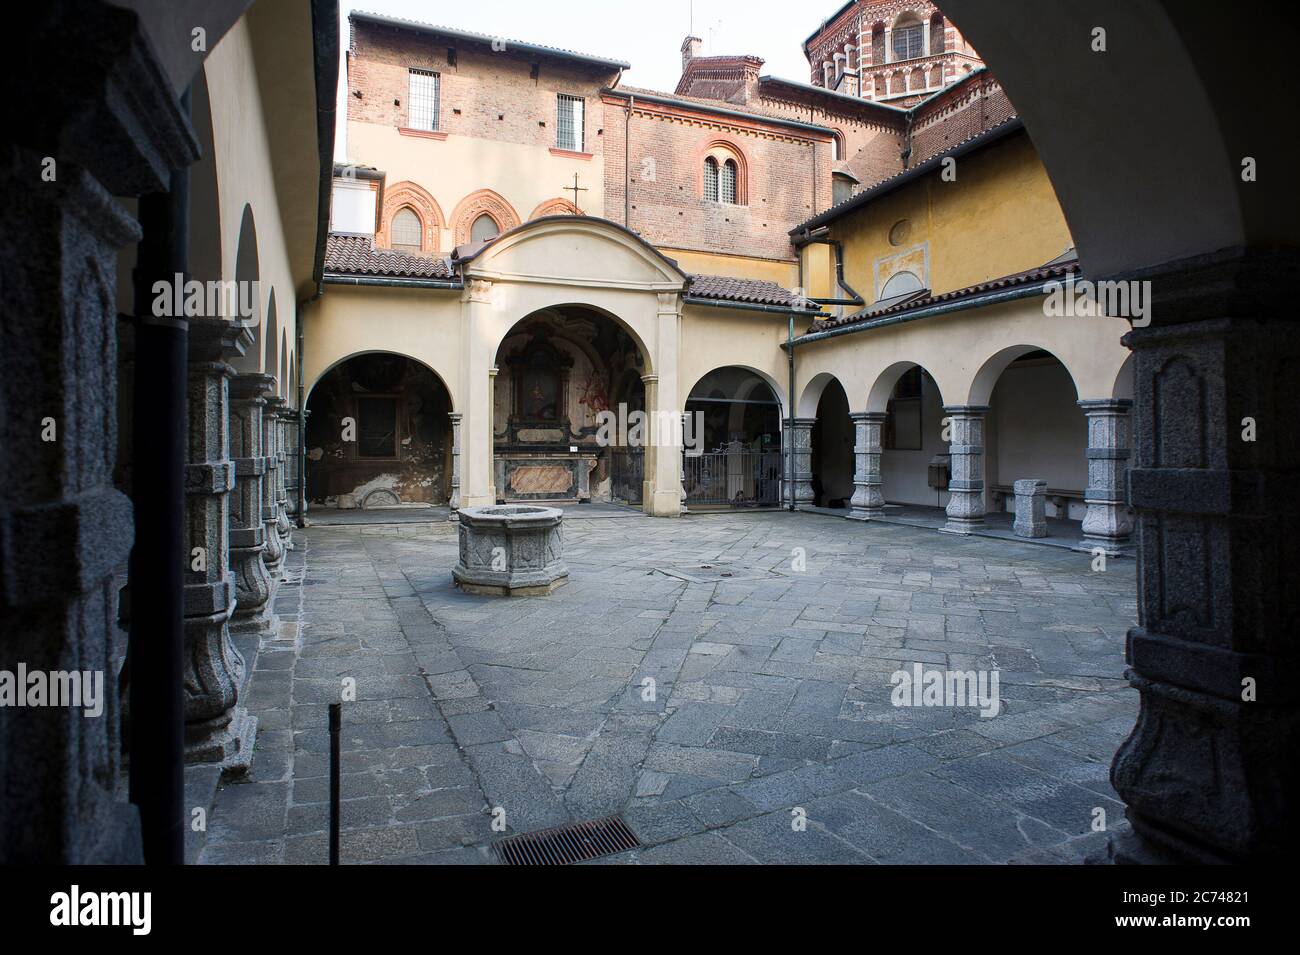 Italy, Lombardy, Monza, outdoor, cathedral, external cloister Stock Photo